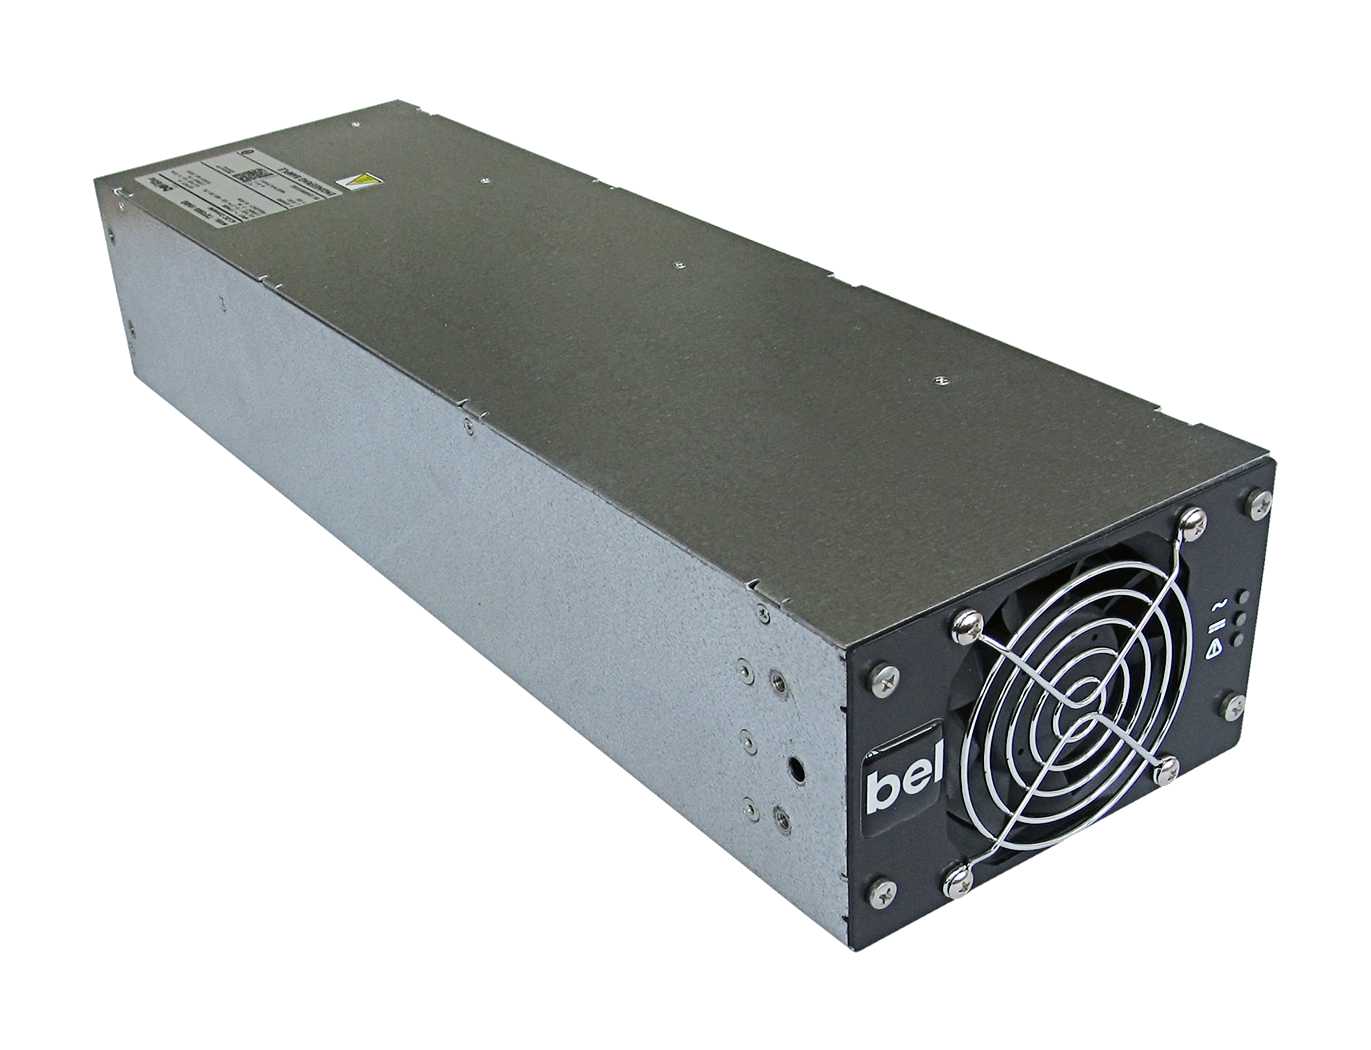 Expanded High Power Portfolio for Industrial Applications